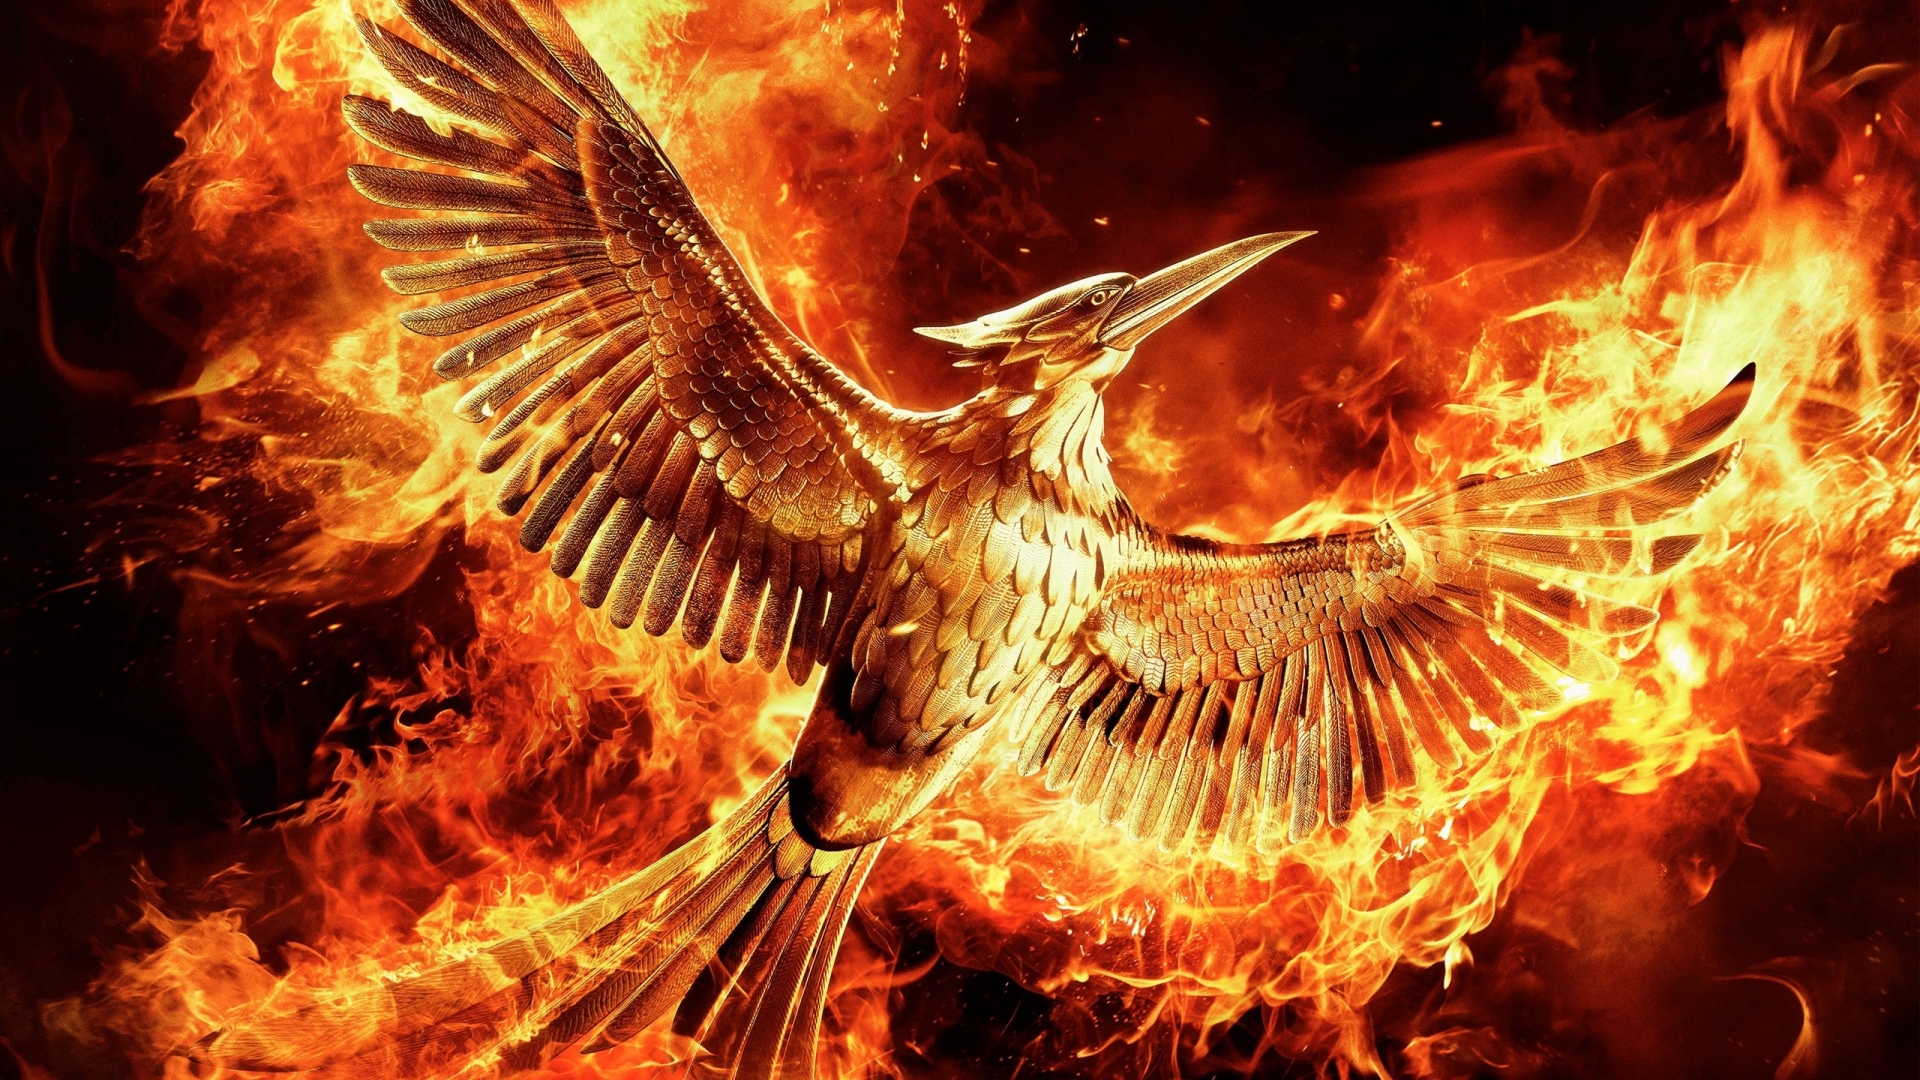 The Hunger Games Mockingjay Part 2 for 1920 x 1080 HDTV 1080p resolution